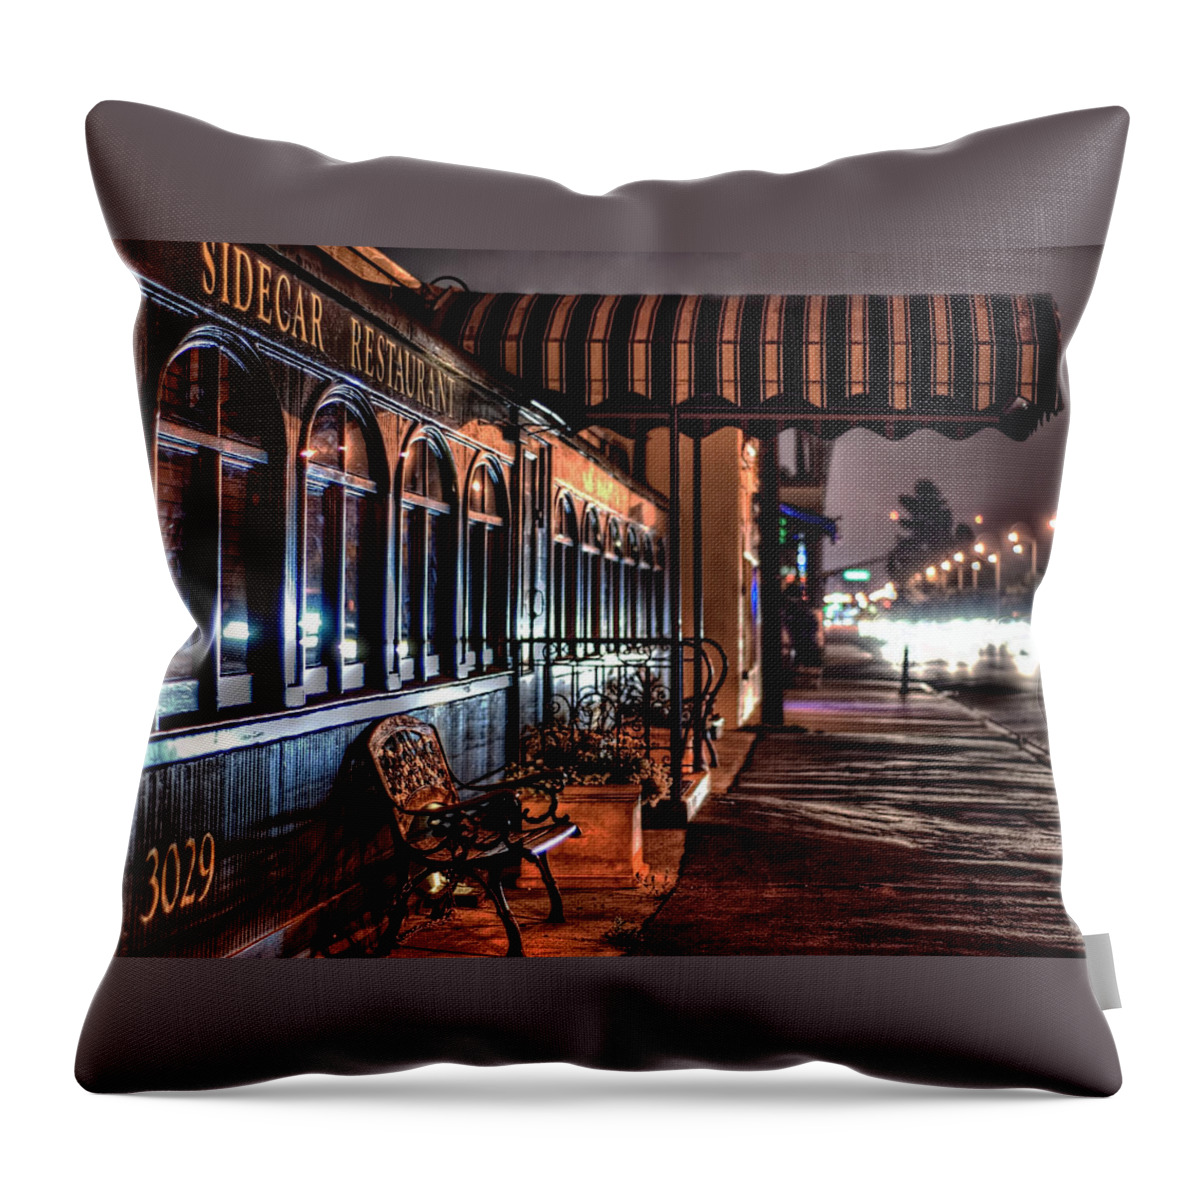 Night Bench Cityscape Sidecar Train Restaurant  Throw Pillow featuring the photograph Eatery by Wendell Ward